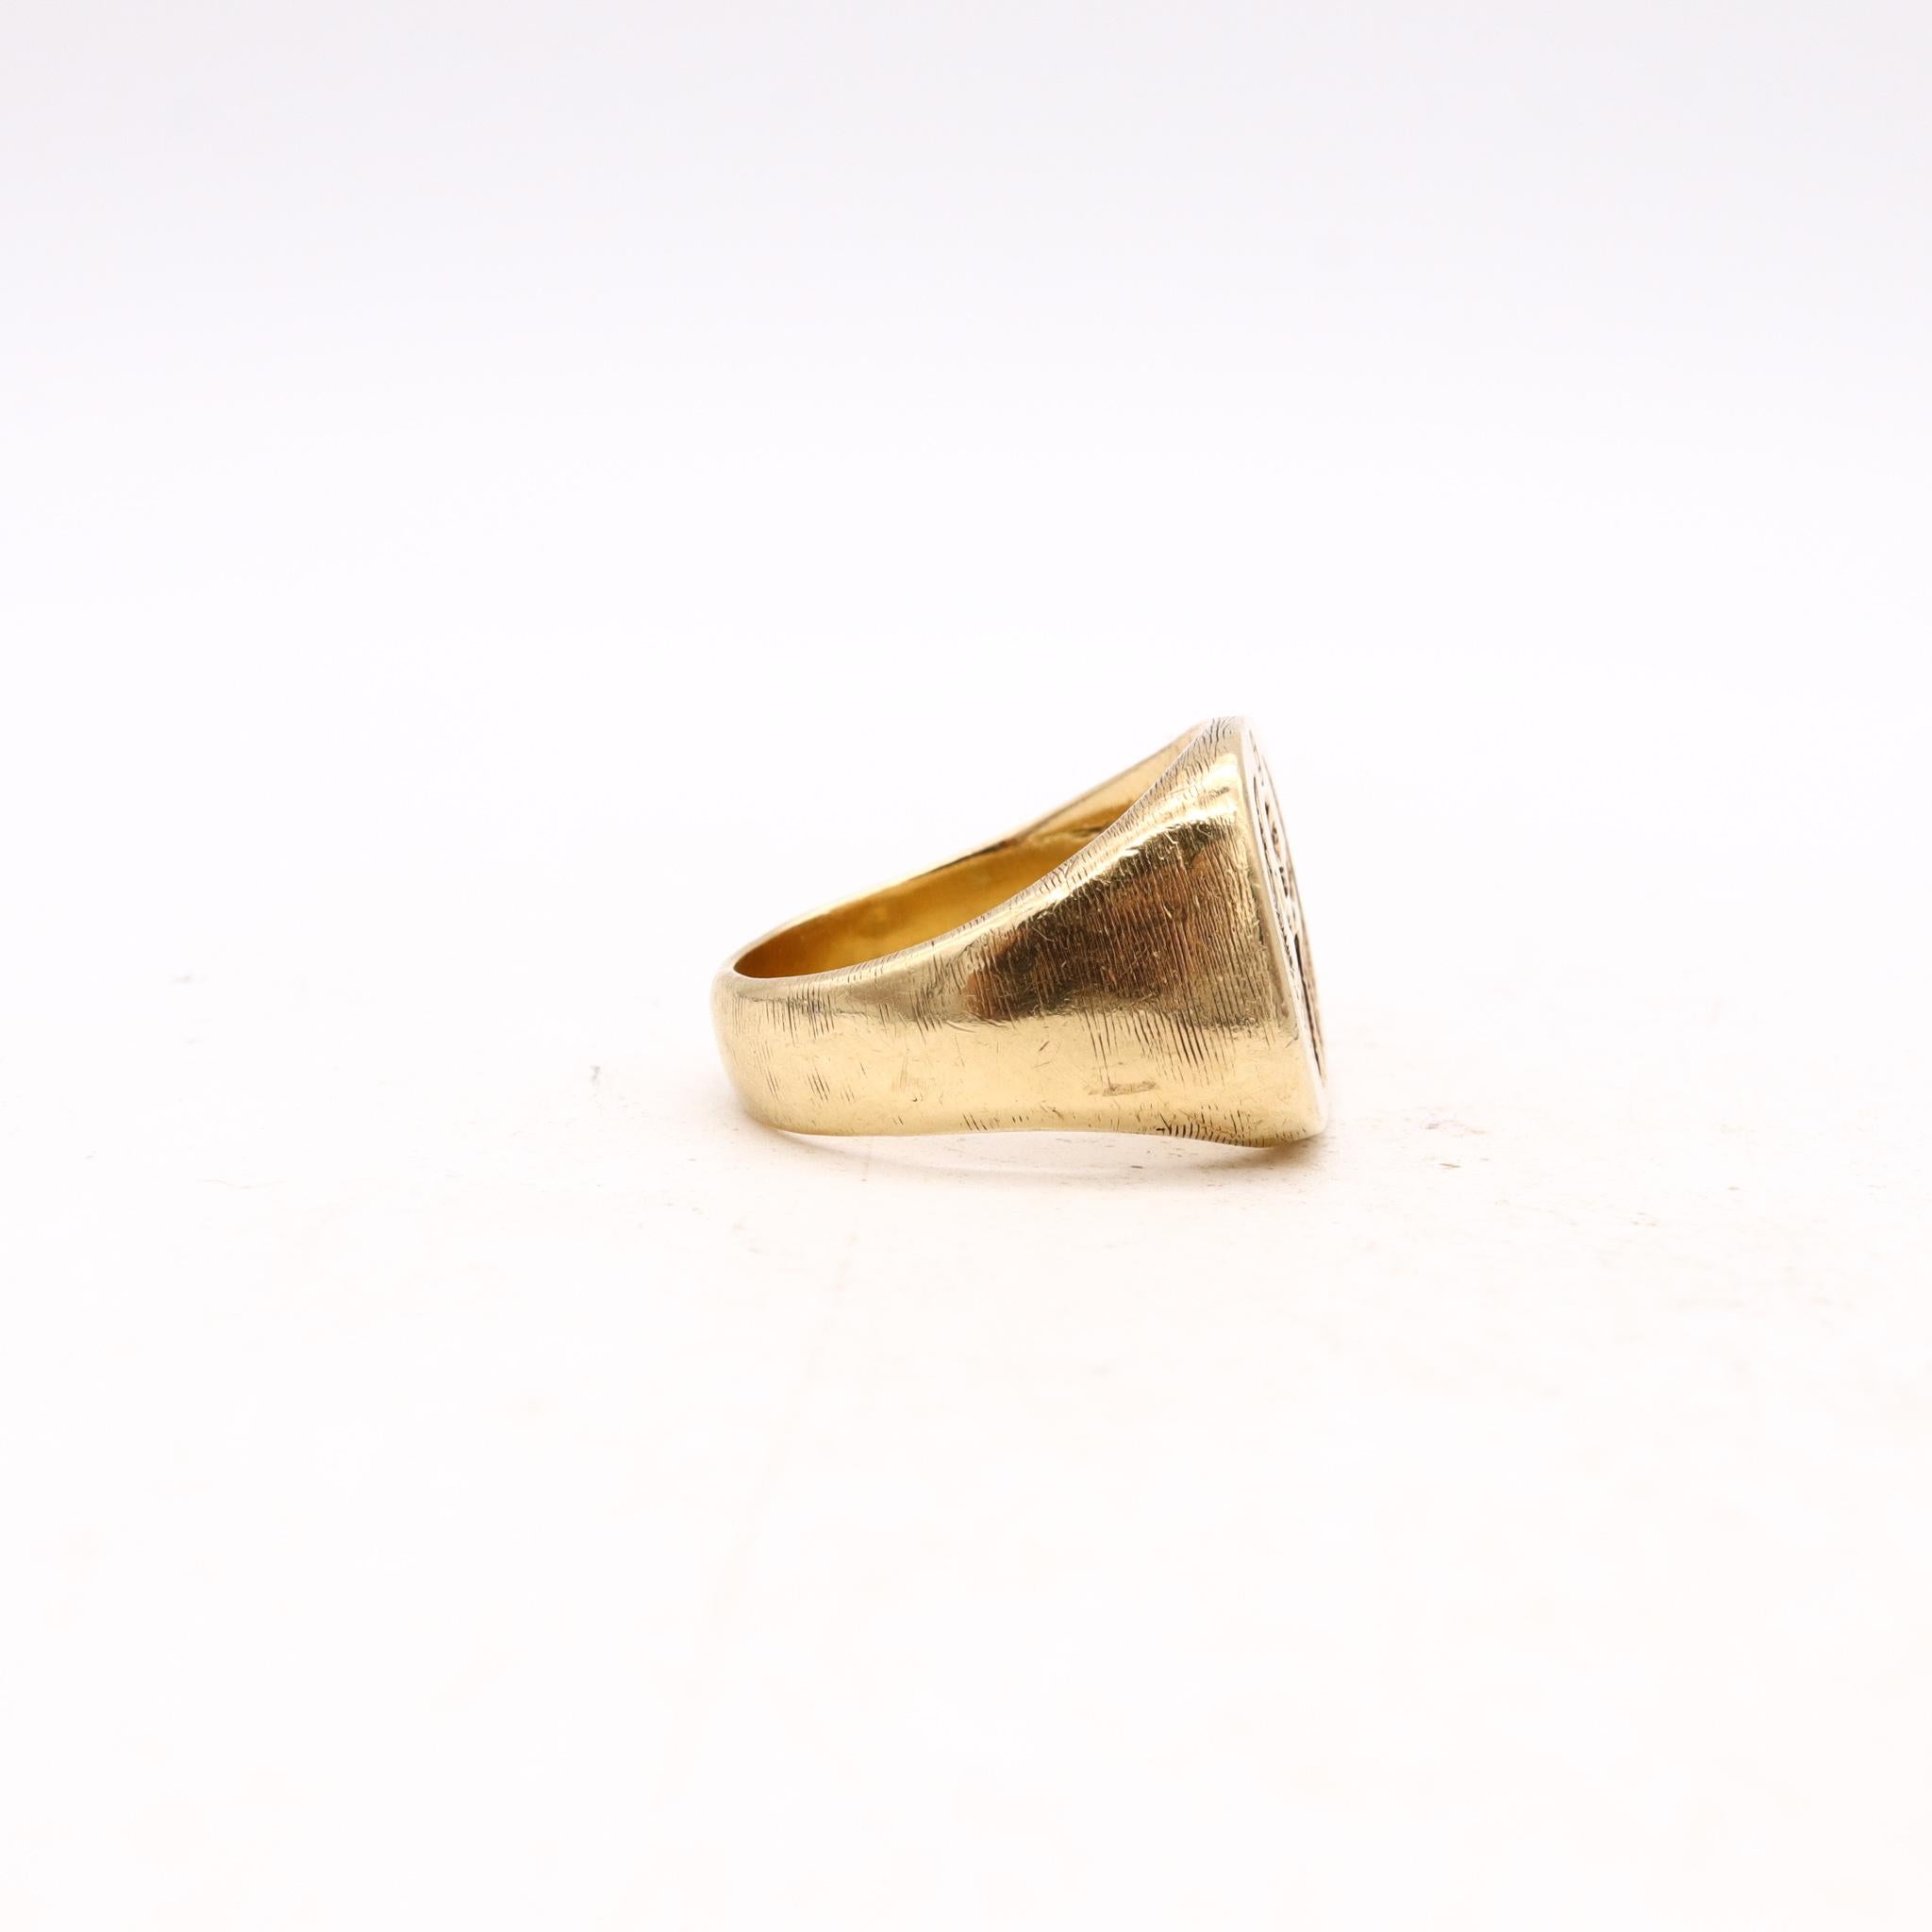 Late Victorian Judaica 19th Century Supreme Council Masonic Seal Signet Ring in Solid 18kt Gold